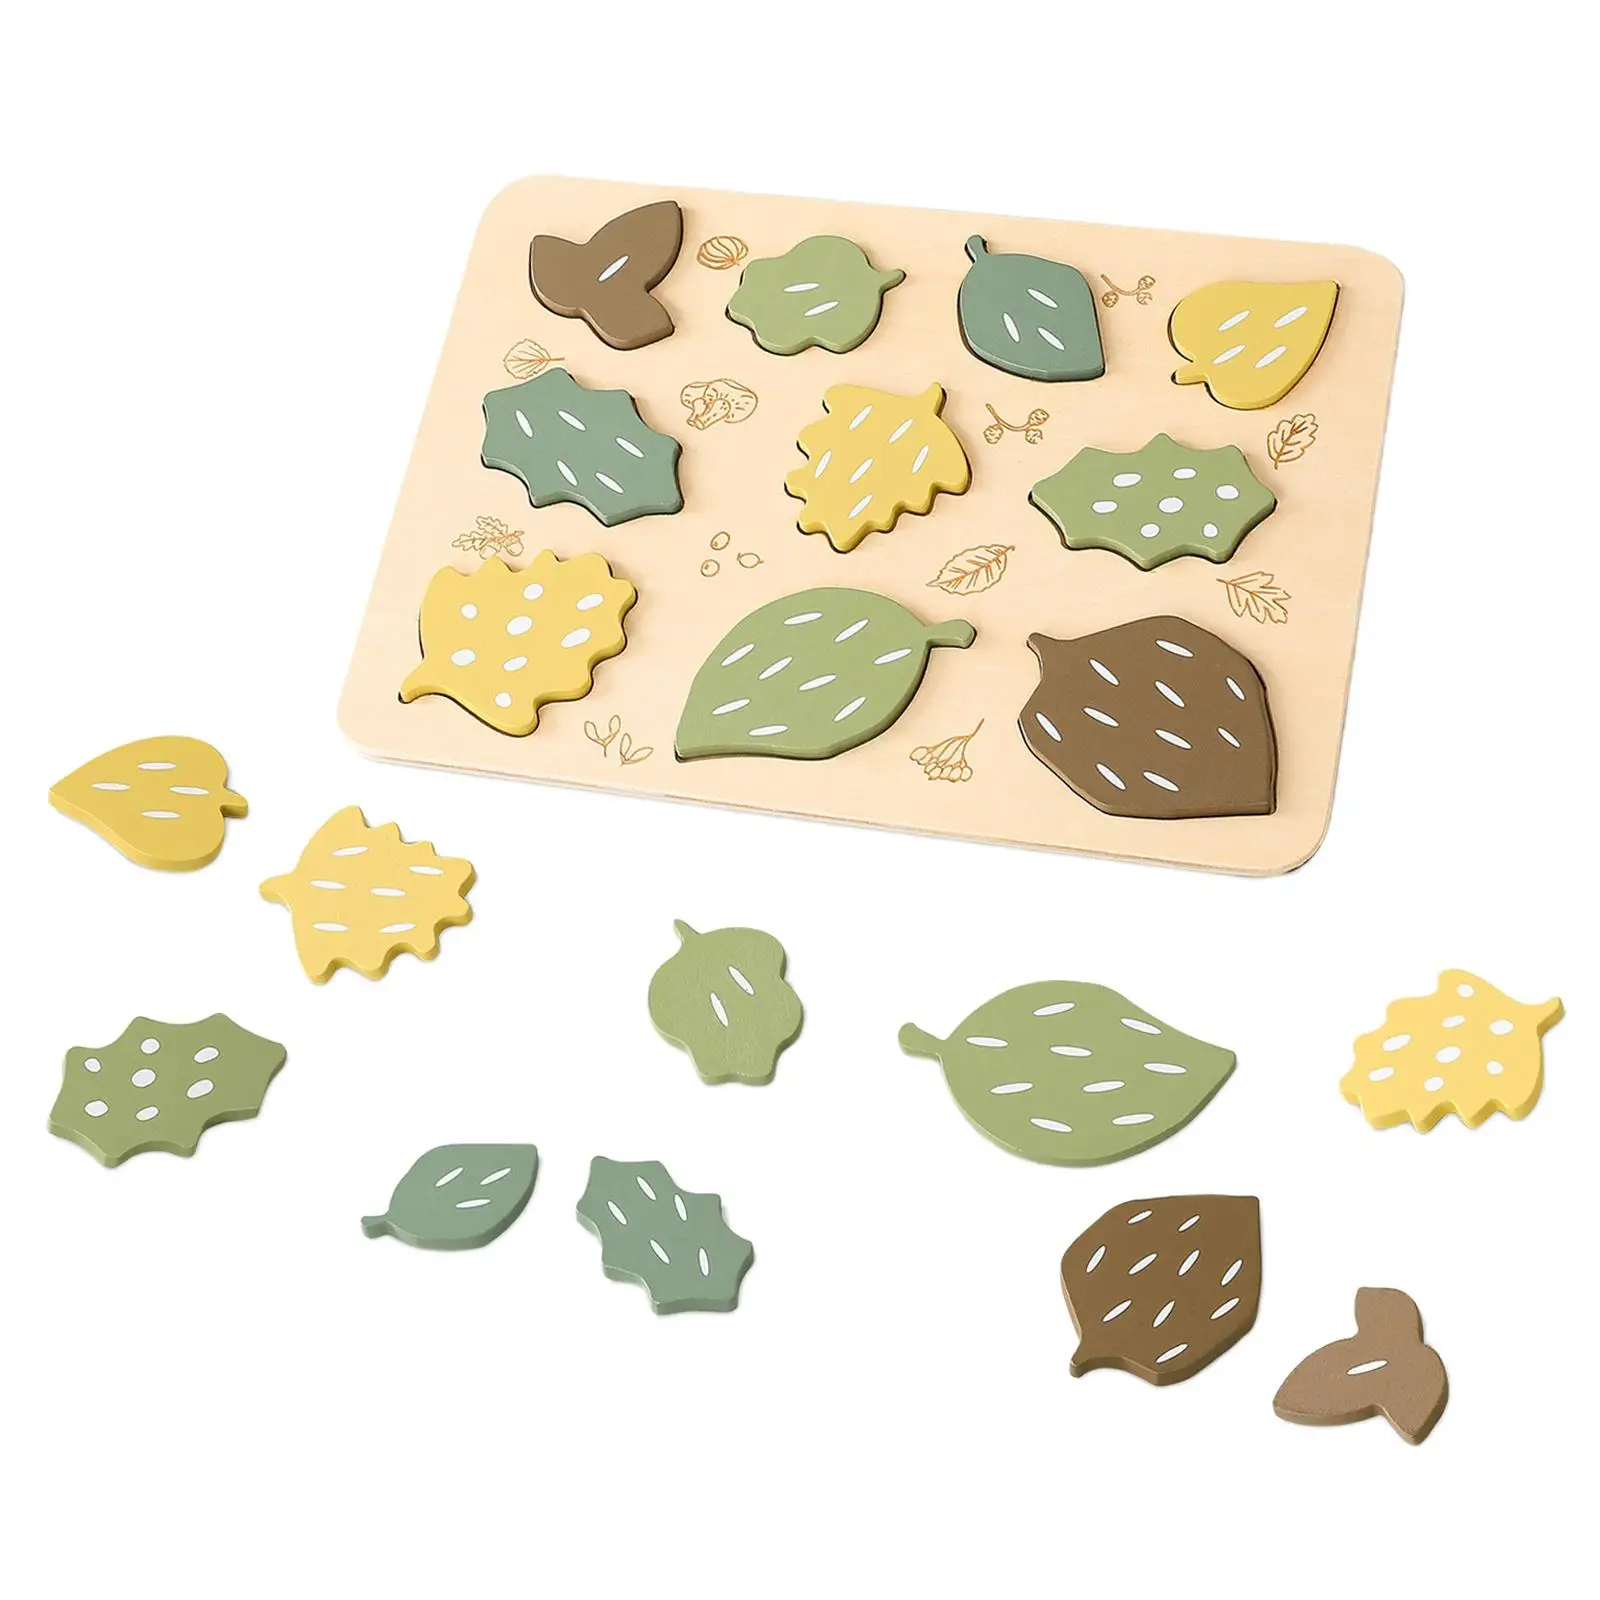 Leaf Jigsaw Puzzles Sorting Puzzle Colorful Shape Fine Motor Skill Stacking Blocks for Preschool Boys Toddlers Girls Kids